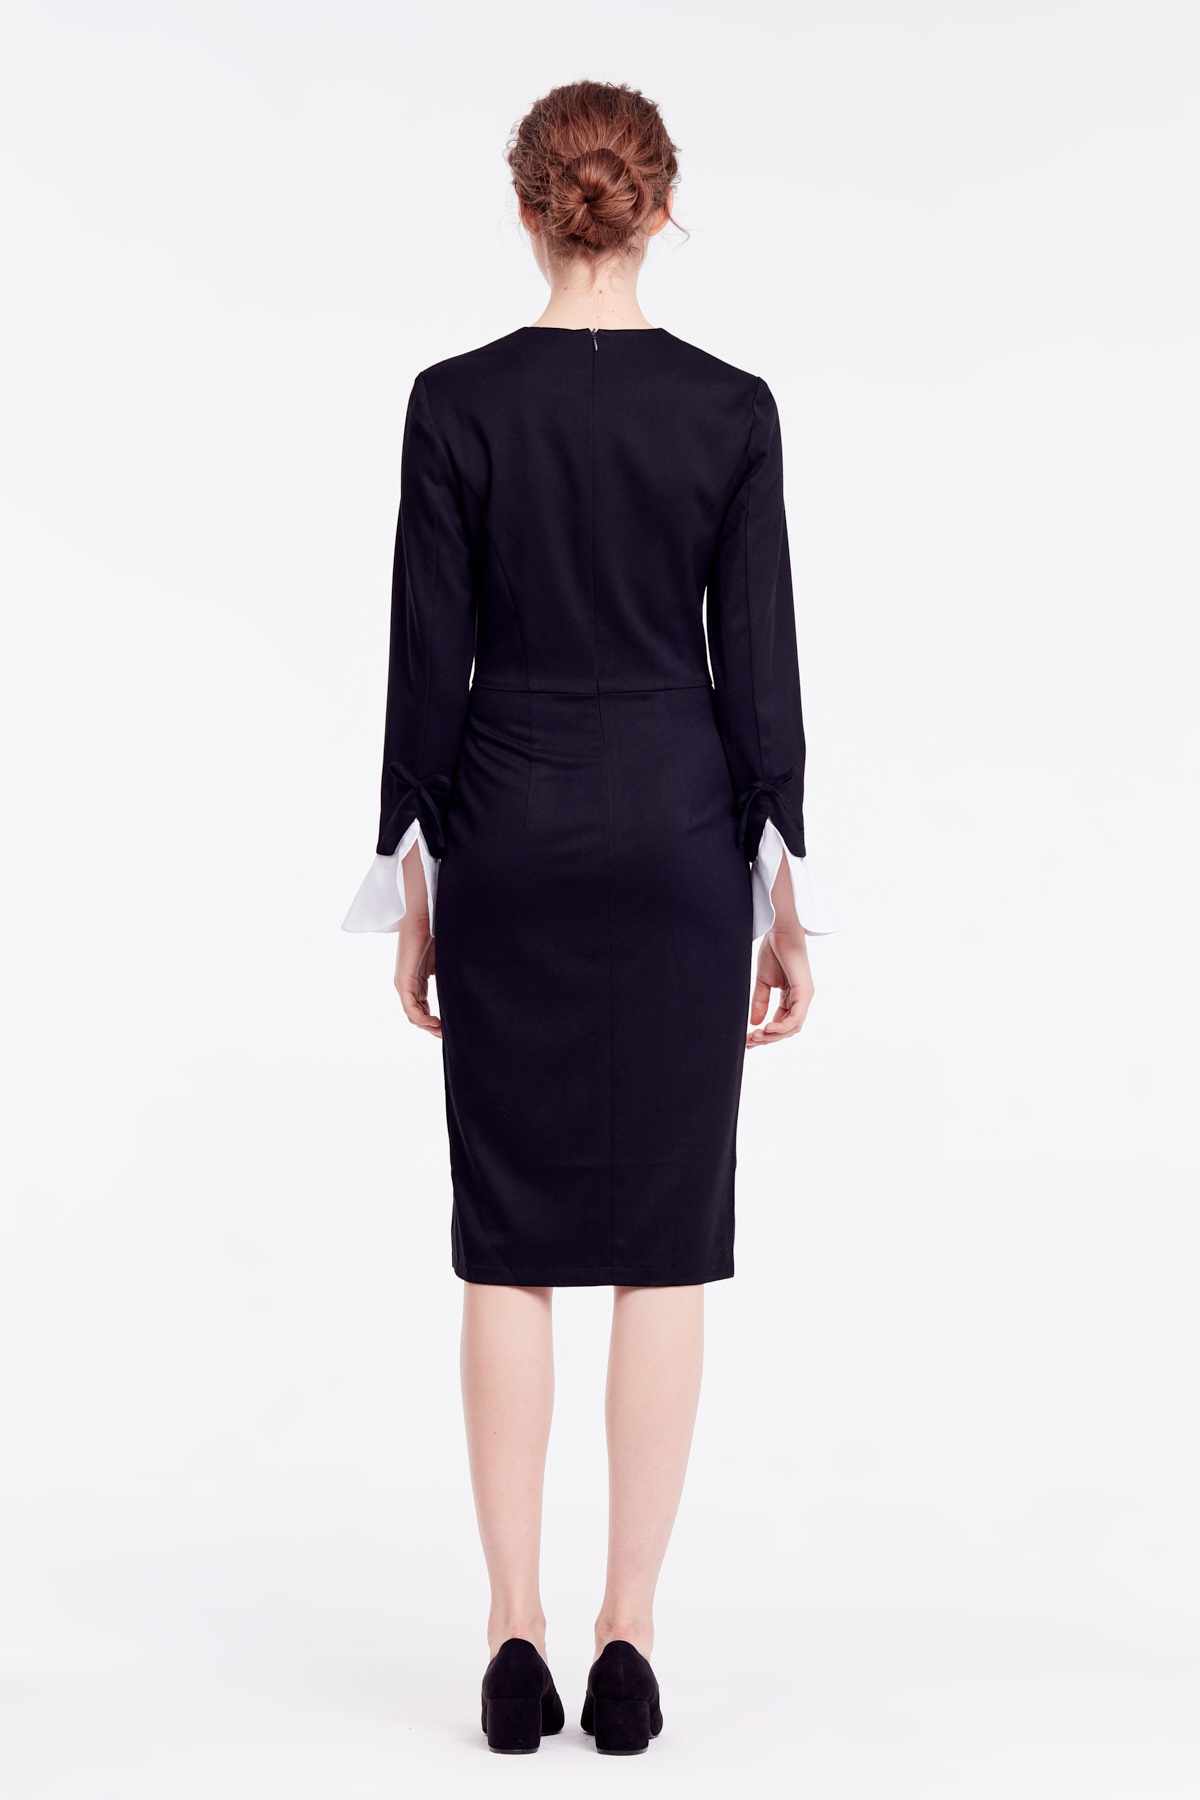 Black column dress with white cuffs on sleeves, photo 4